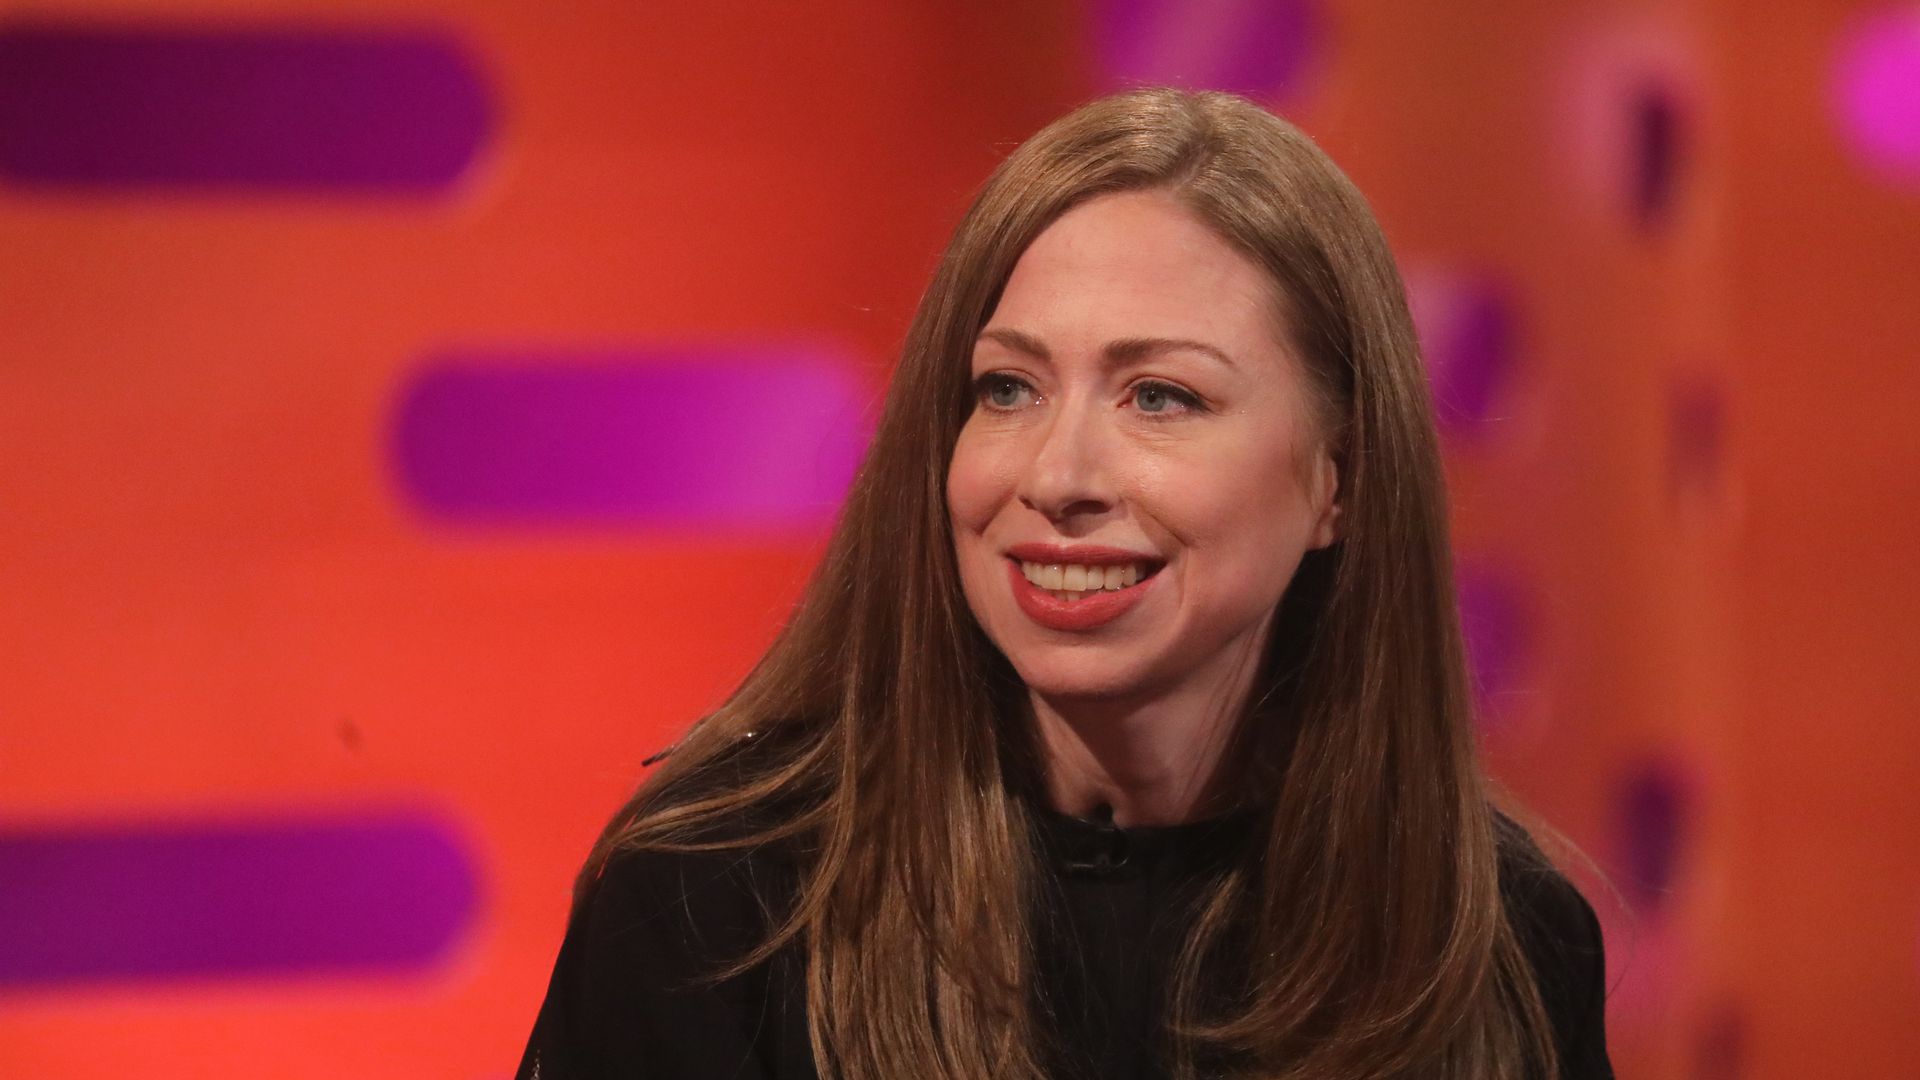 Chelsea Clinton during the filming for the Graham Norton Show at BBC Studioworks 6 Television Centre, Wood Lane, London, to be aired on BBC One on Friday evening